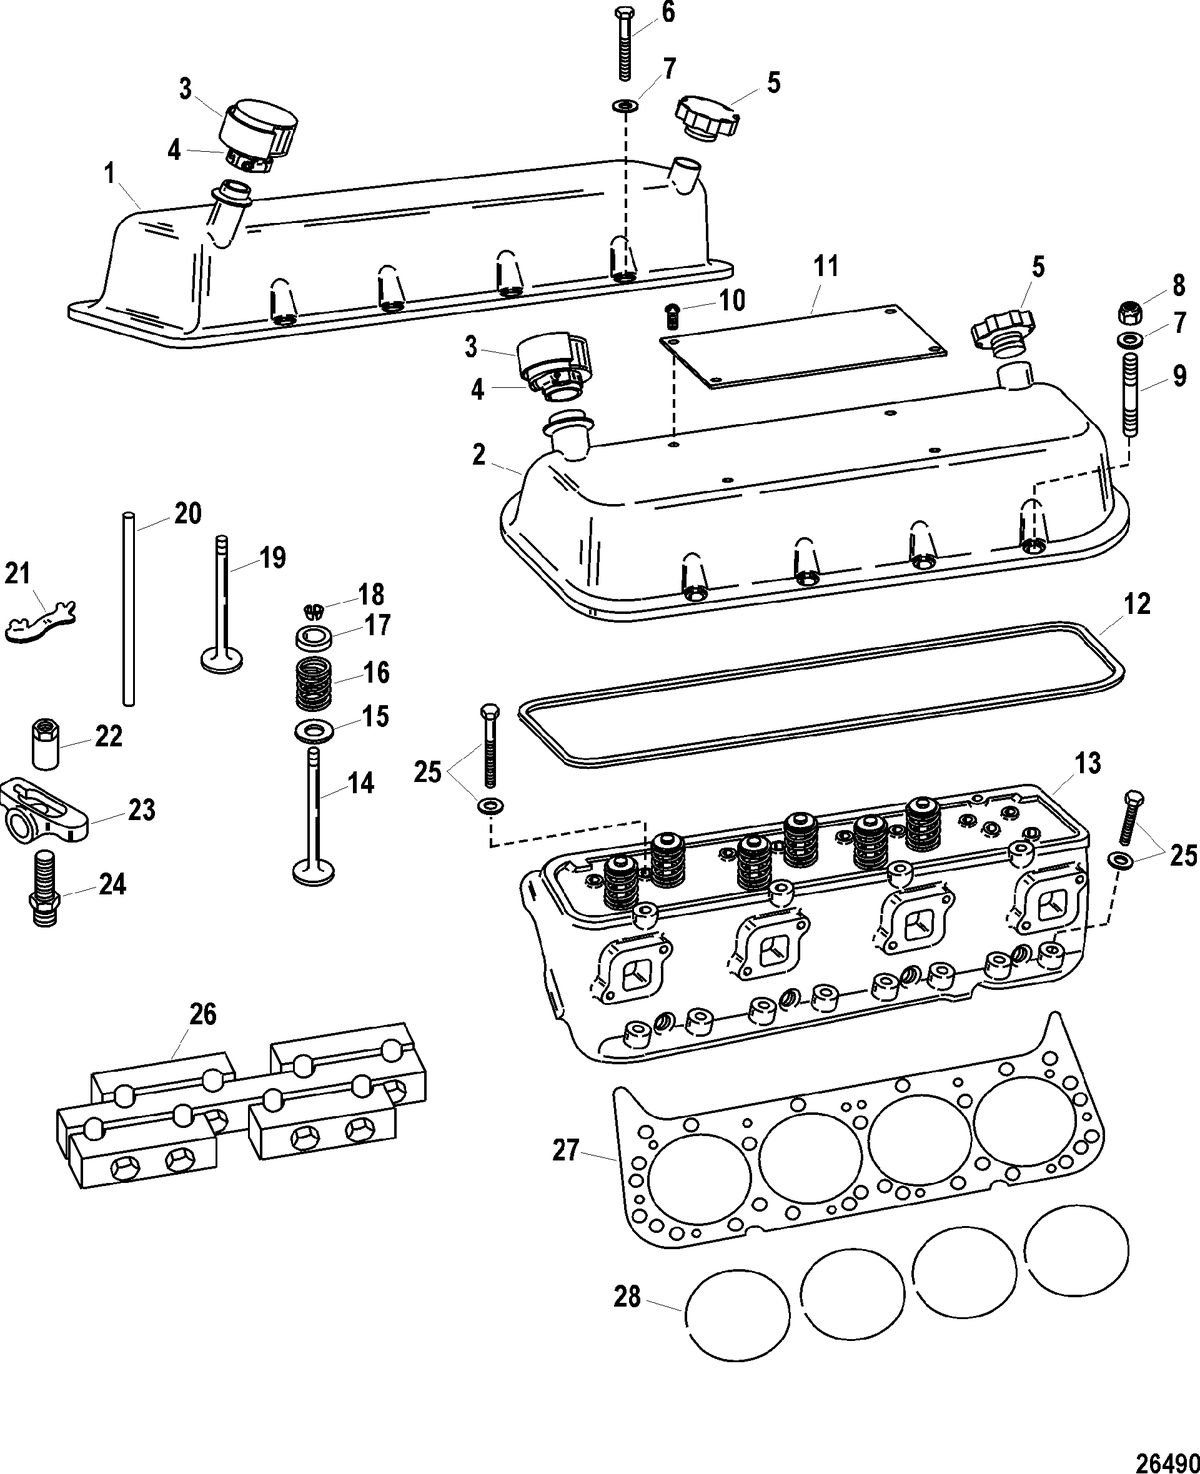 RACE STERNDRIVE 900 SC - DRY SUMP Cylinder Head And Rocker Cover